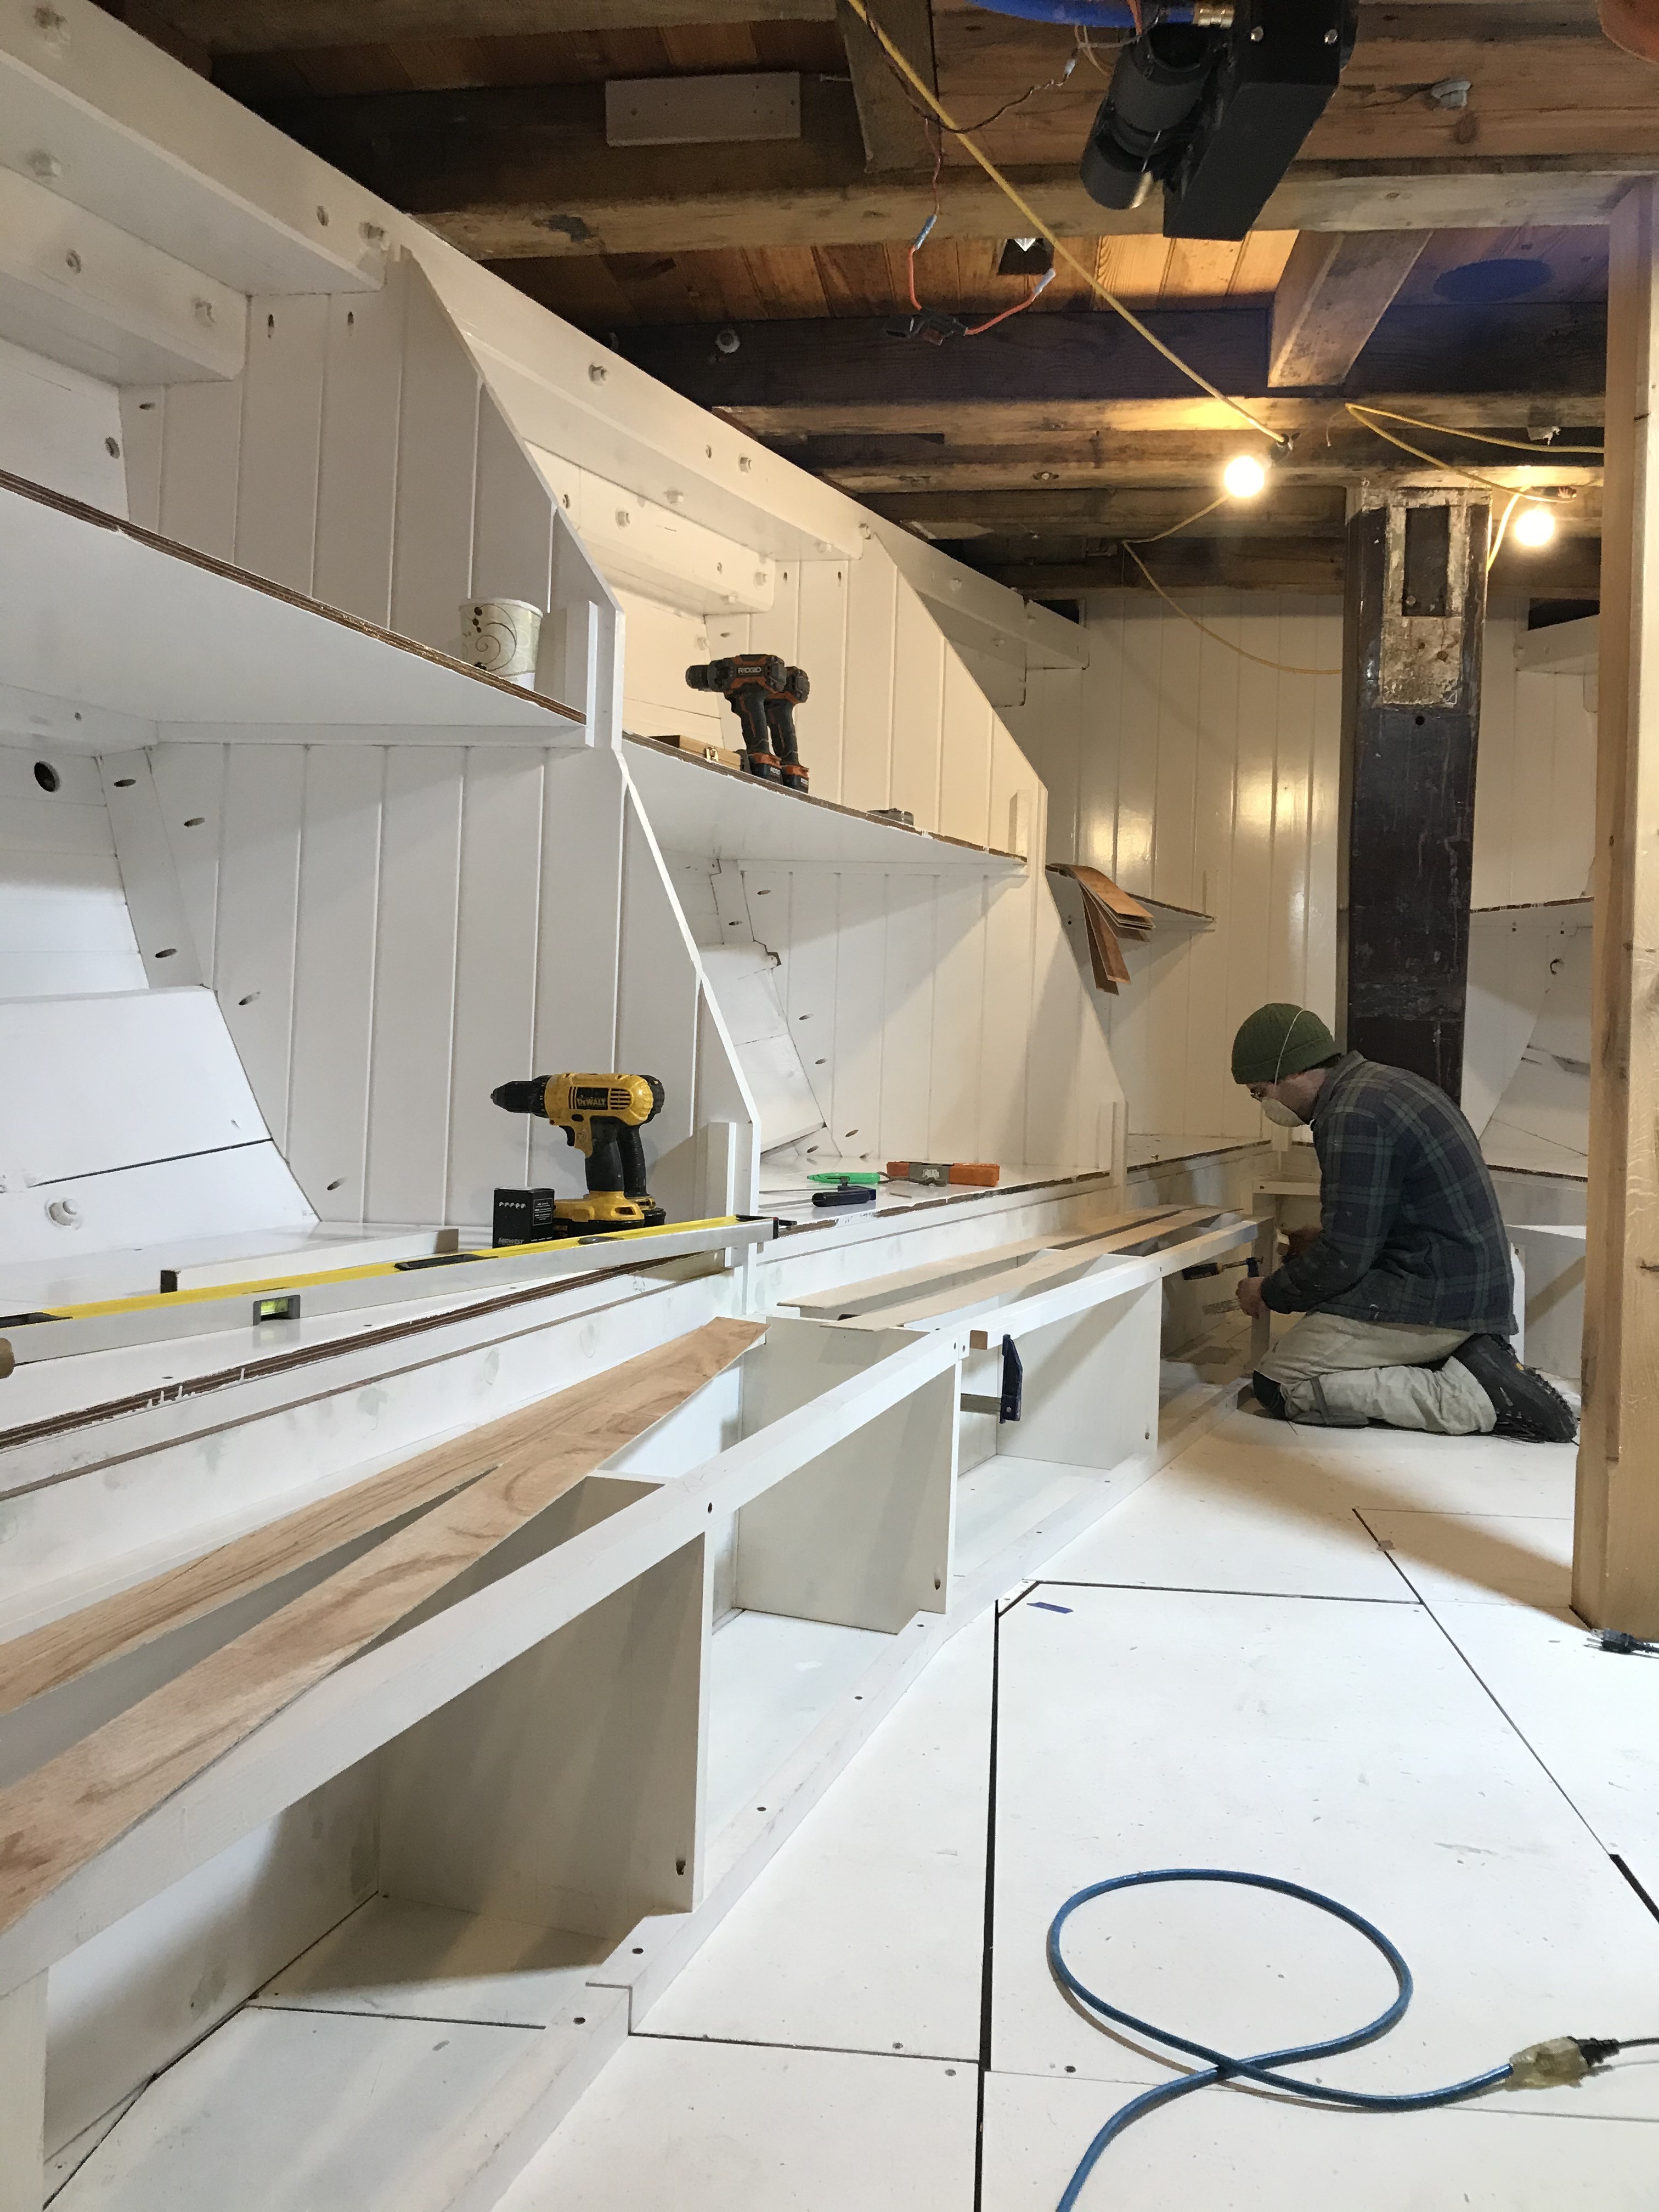 Sam Perkins is carefully fitting the last few vertical partitions for the port side benches.  These benches will serve a dual role in this space.  A large mess table will be built in the center of the cabin and these benches will serve as the seating.  The benches will also serve as storage spaces for the personal belongings of each bunk occupant.